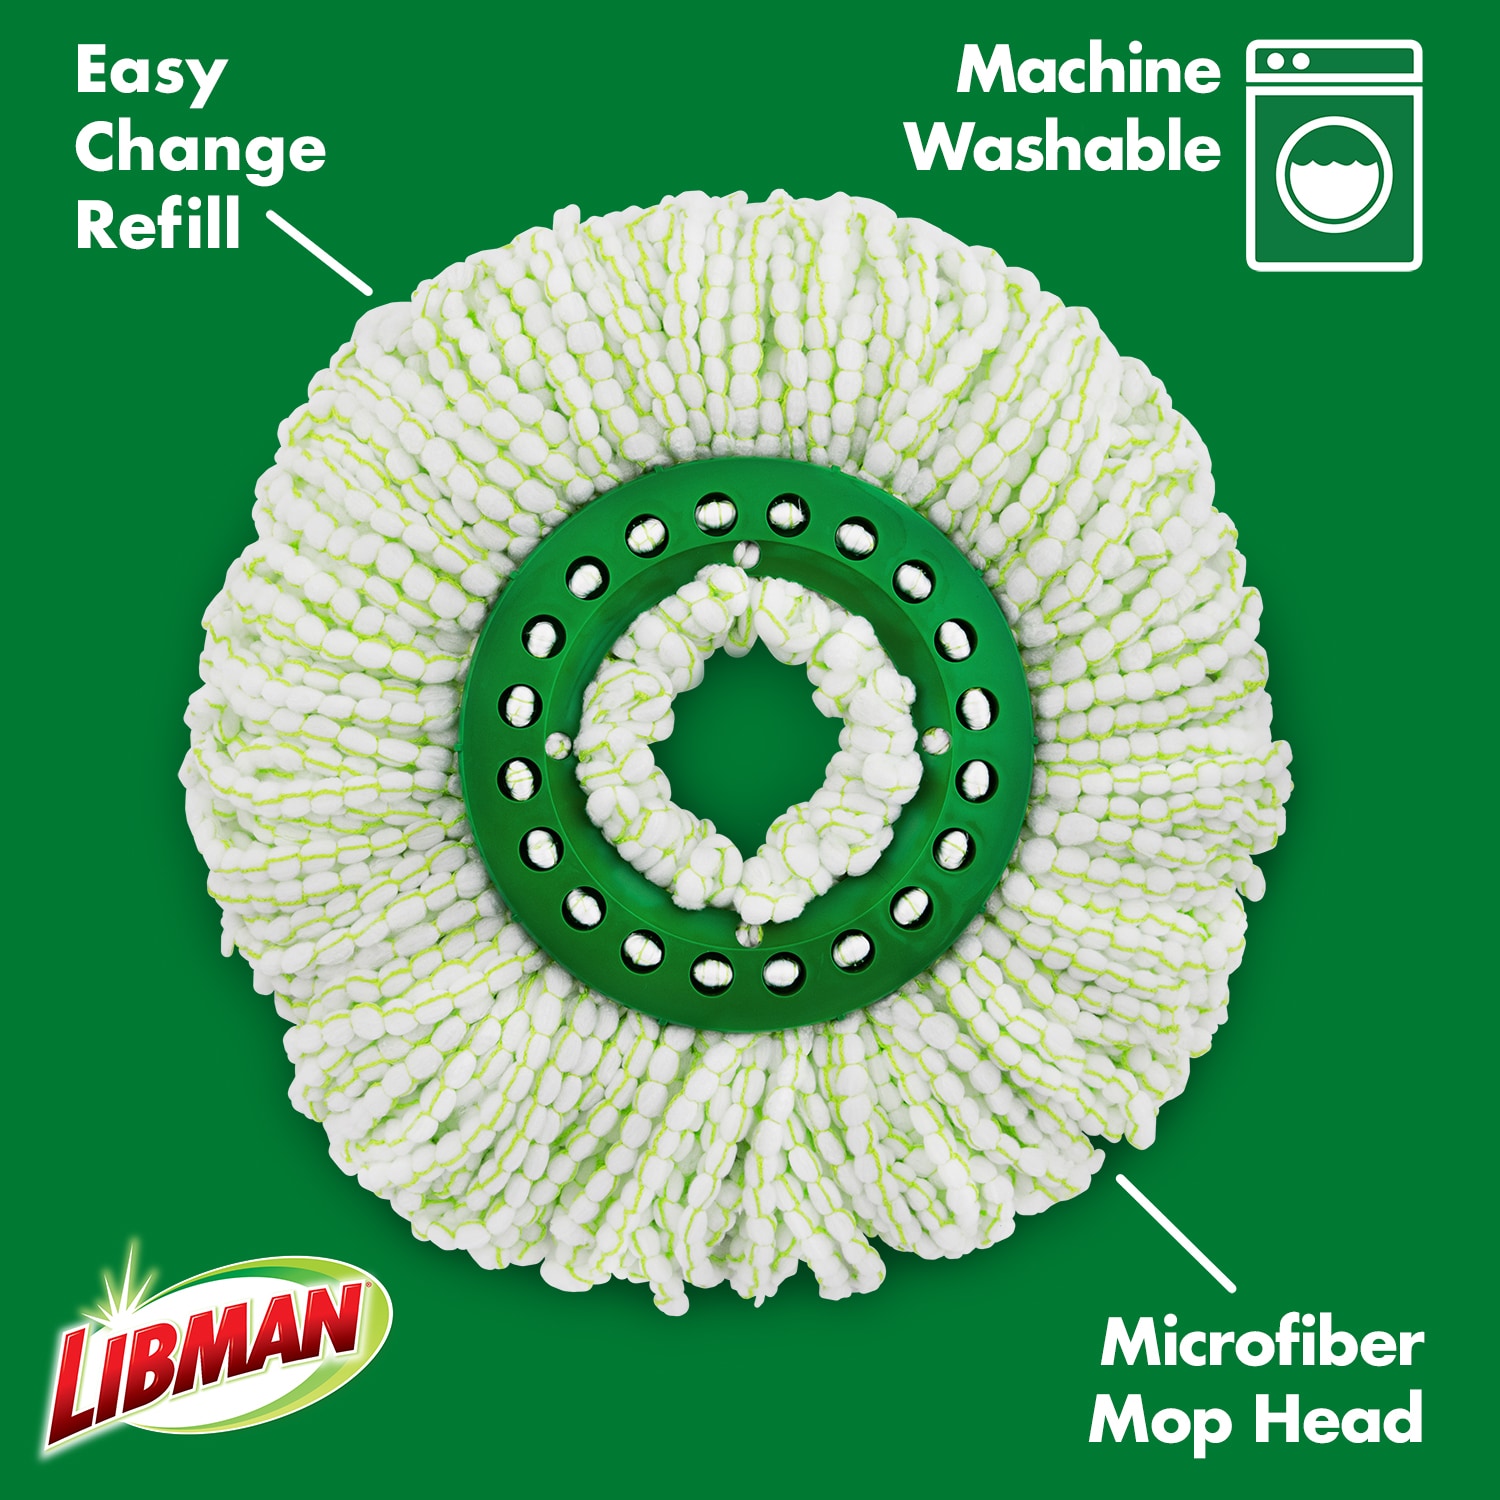 Microfiber Wet Tornado Spin Mop And Bucket Floor Cleaning System